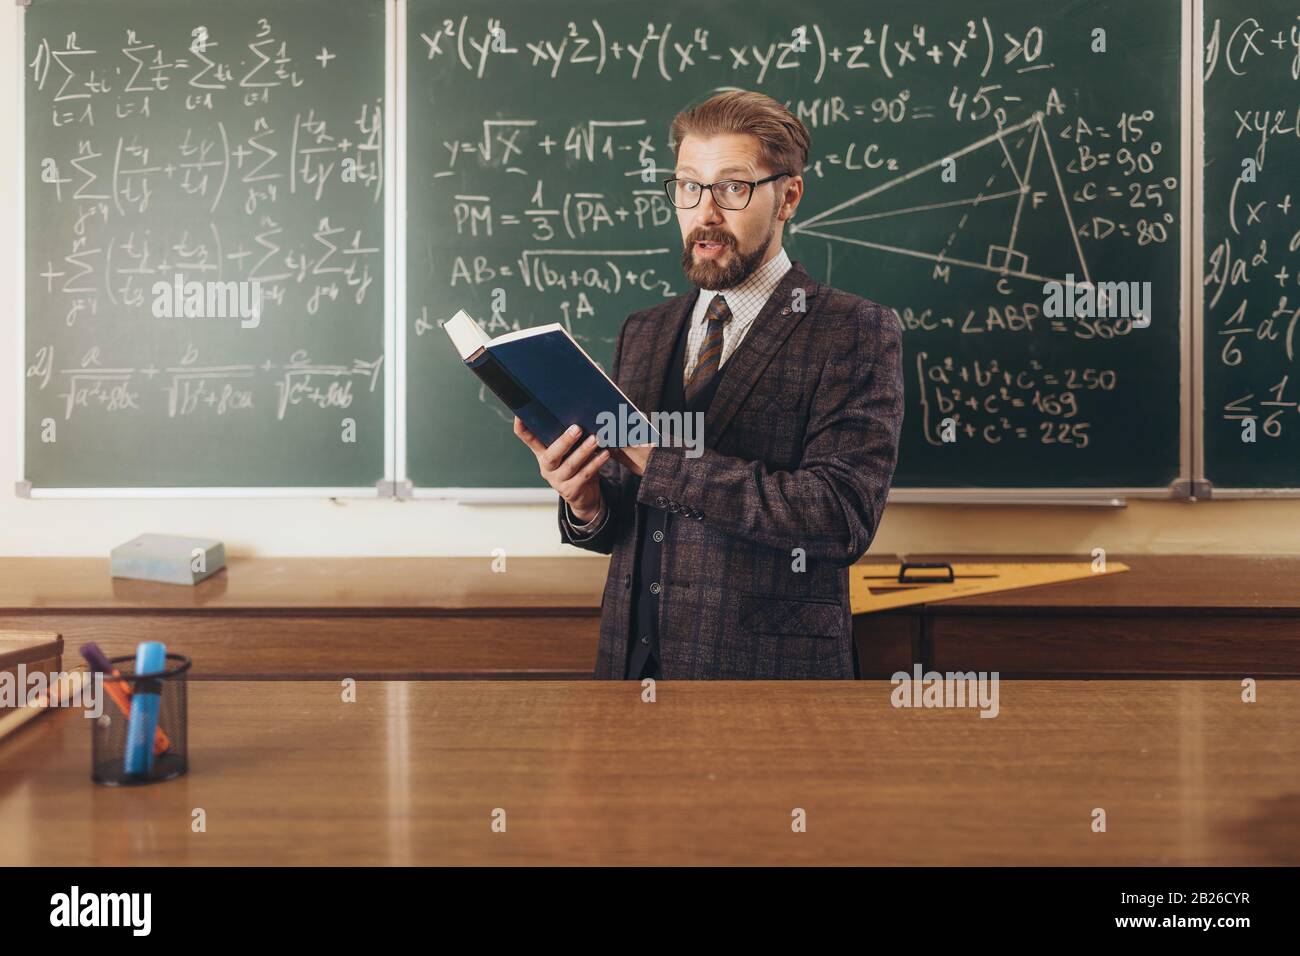 Bearded professor in suit and glasses citing a manual to explain the math lecture material Stock Photo